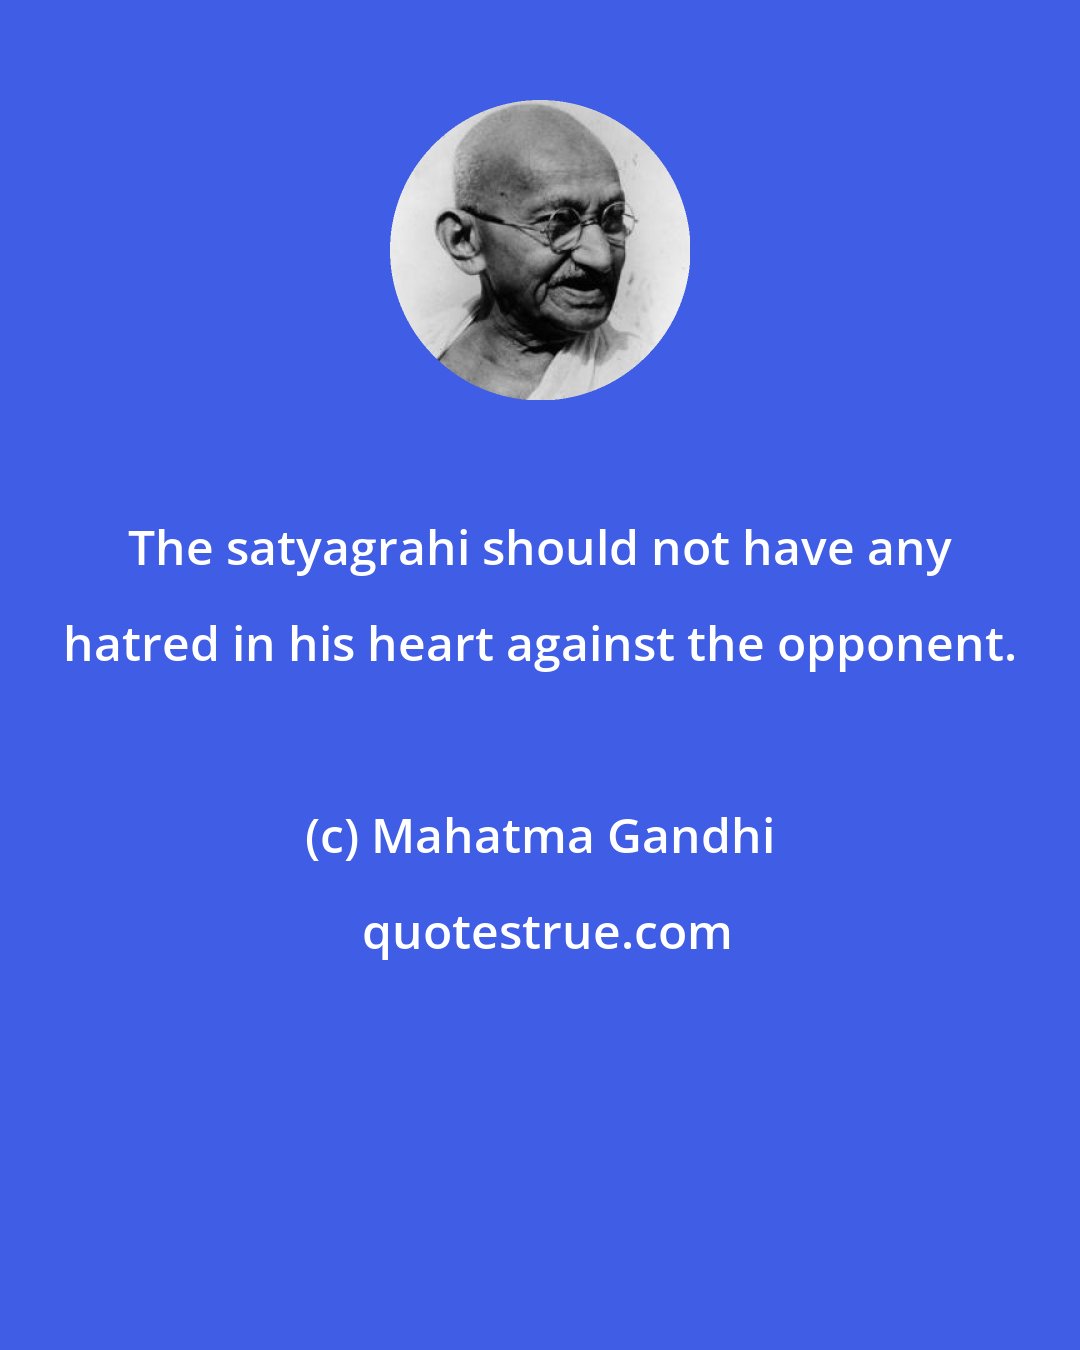 Mahatma Gandhi: The satyagrahi should not have any hatred in his heart against the opponent.